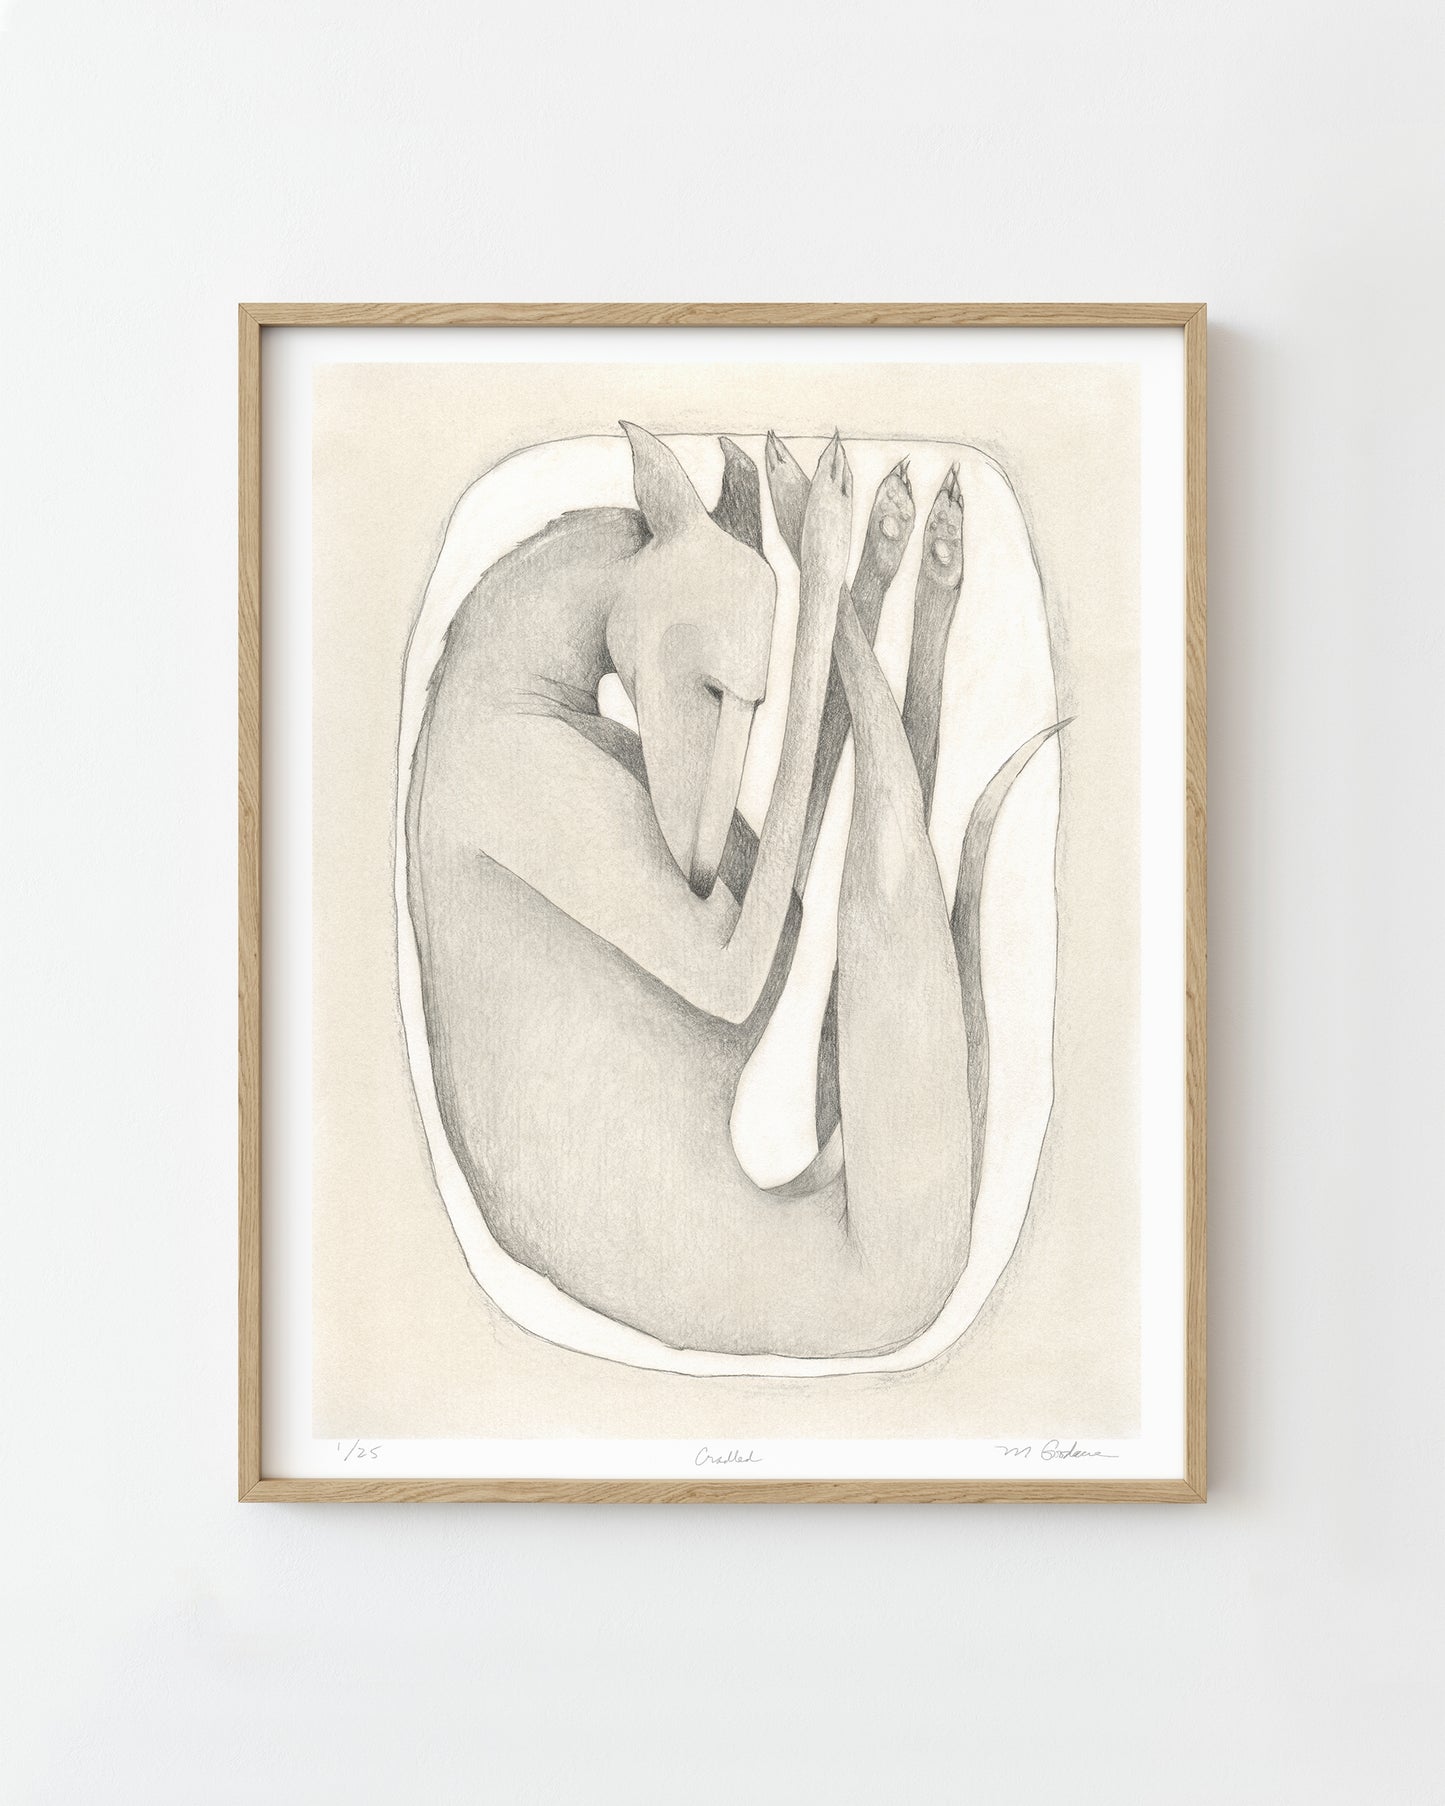 Framed surreal drawing of a sleeping greyhound suspended in space.